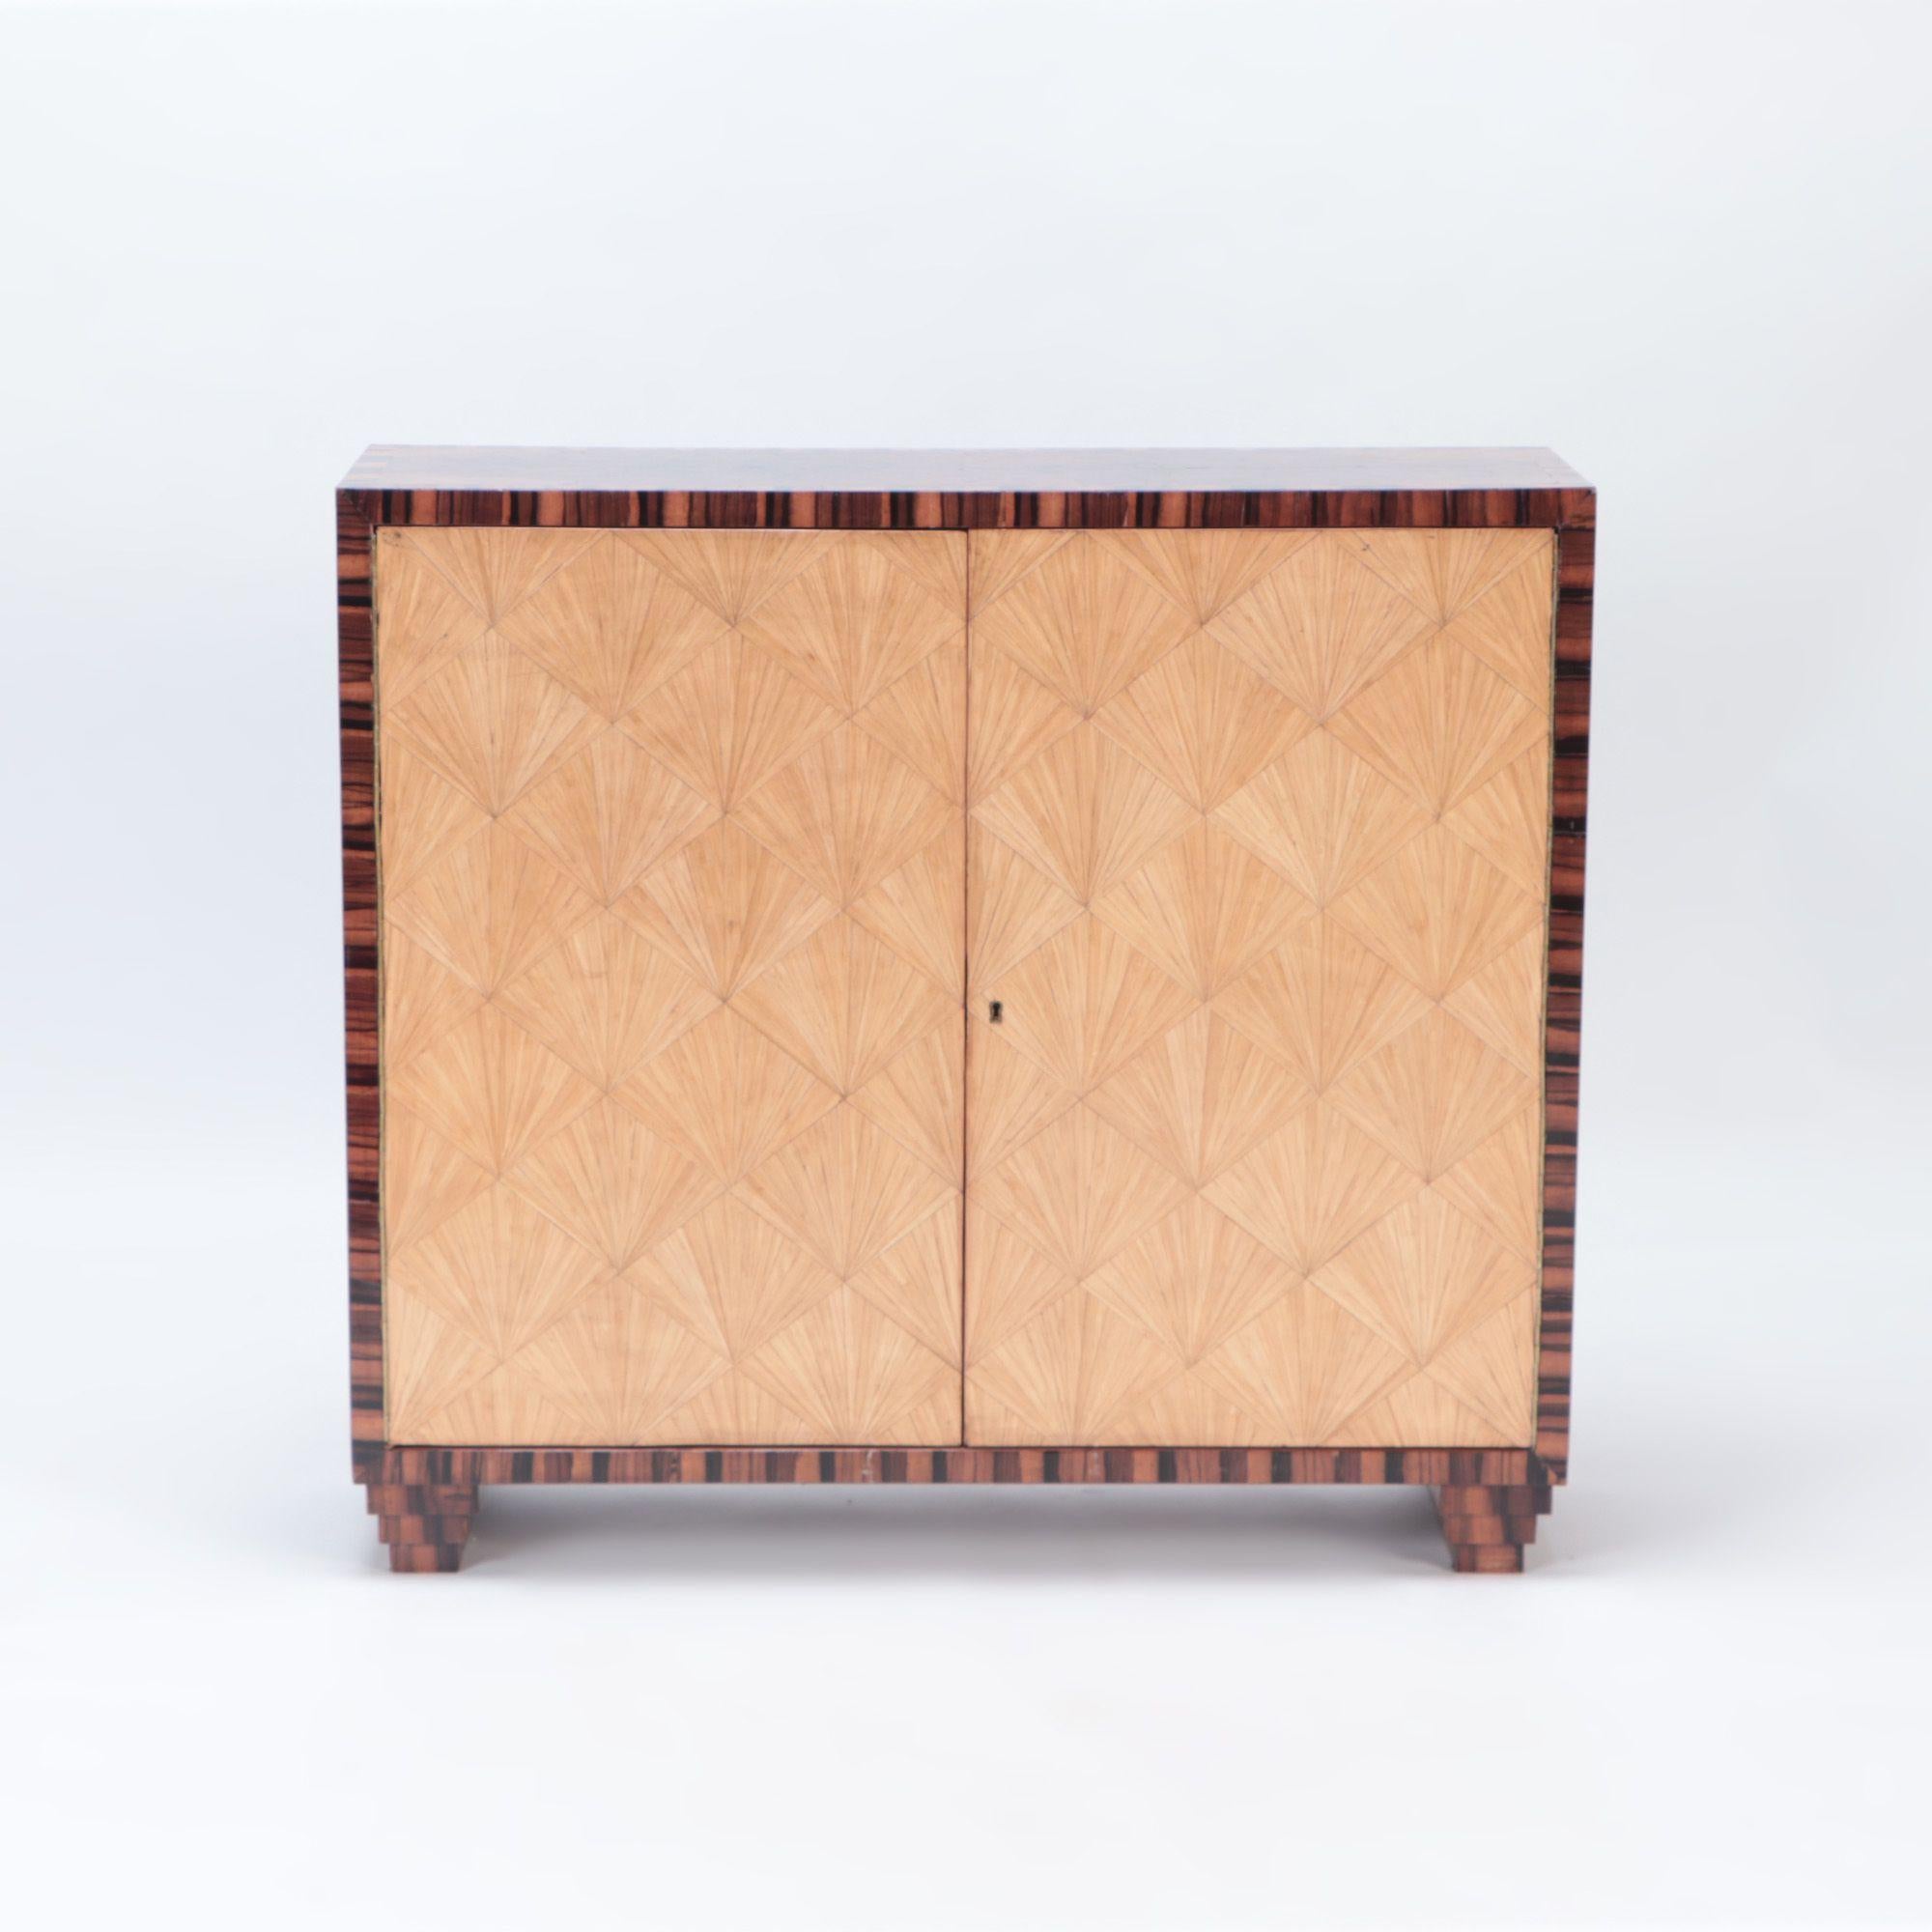 A beautiful pair of inlaid cabinets in the manner of Jean Michel Frank. The top is in burl walnut and bordered in rosewood and the doors have straw marquetry inlay of bleached mahogany.